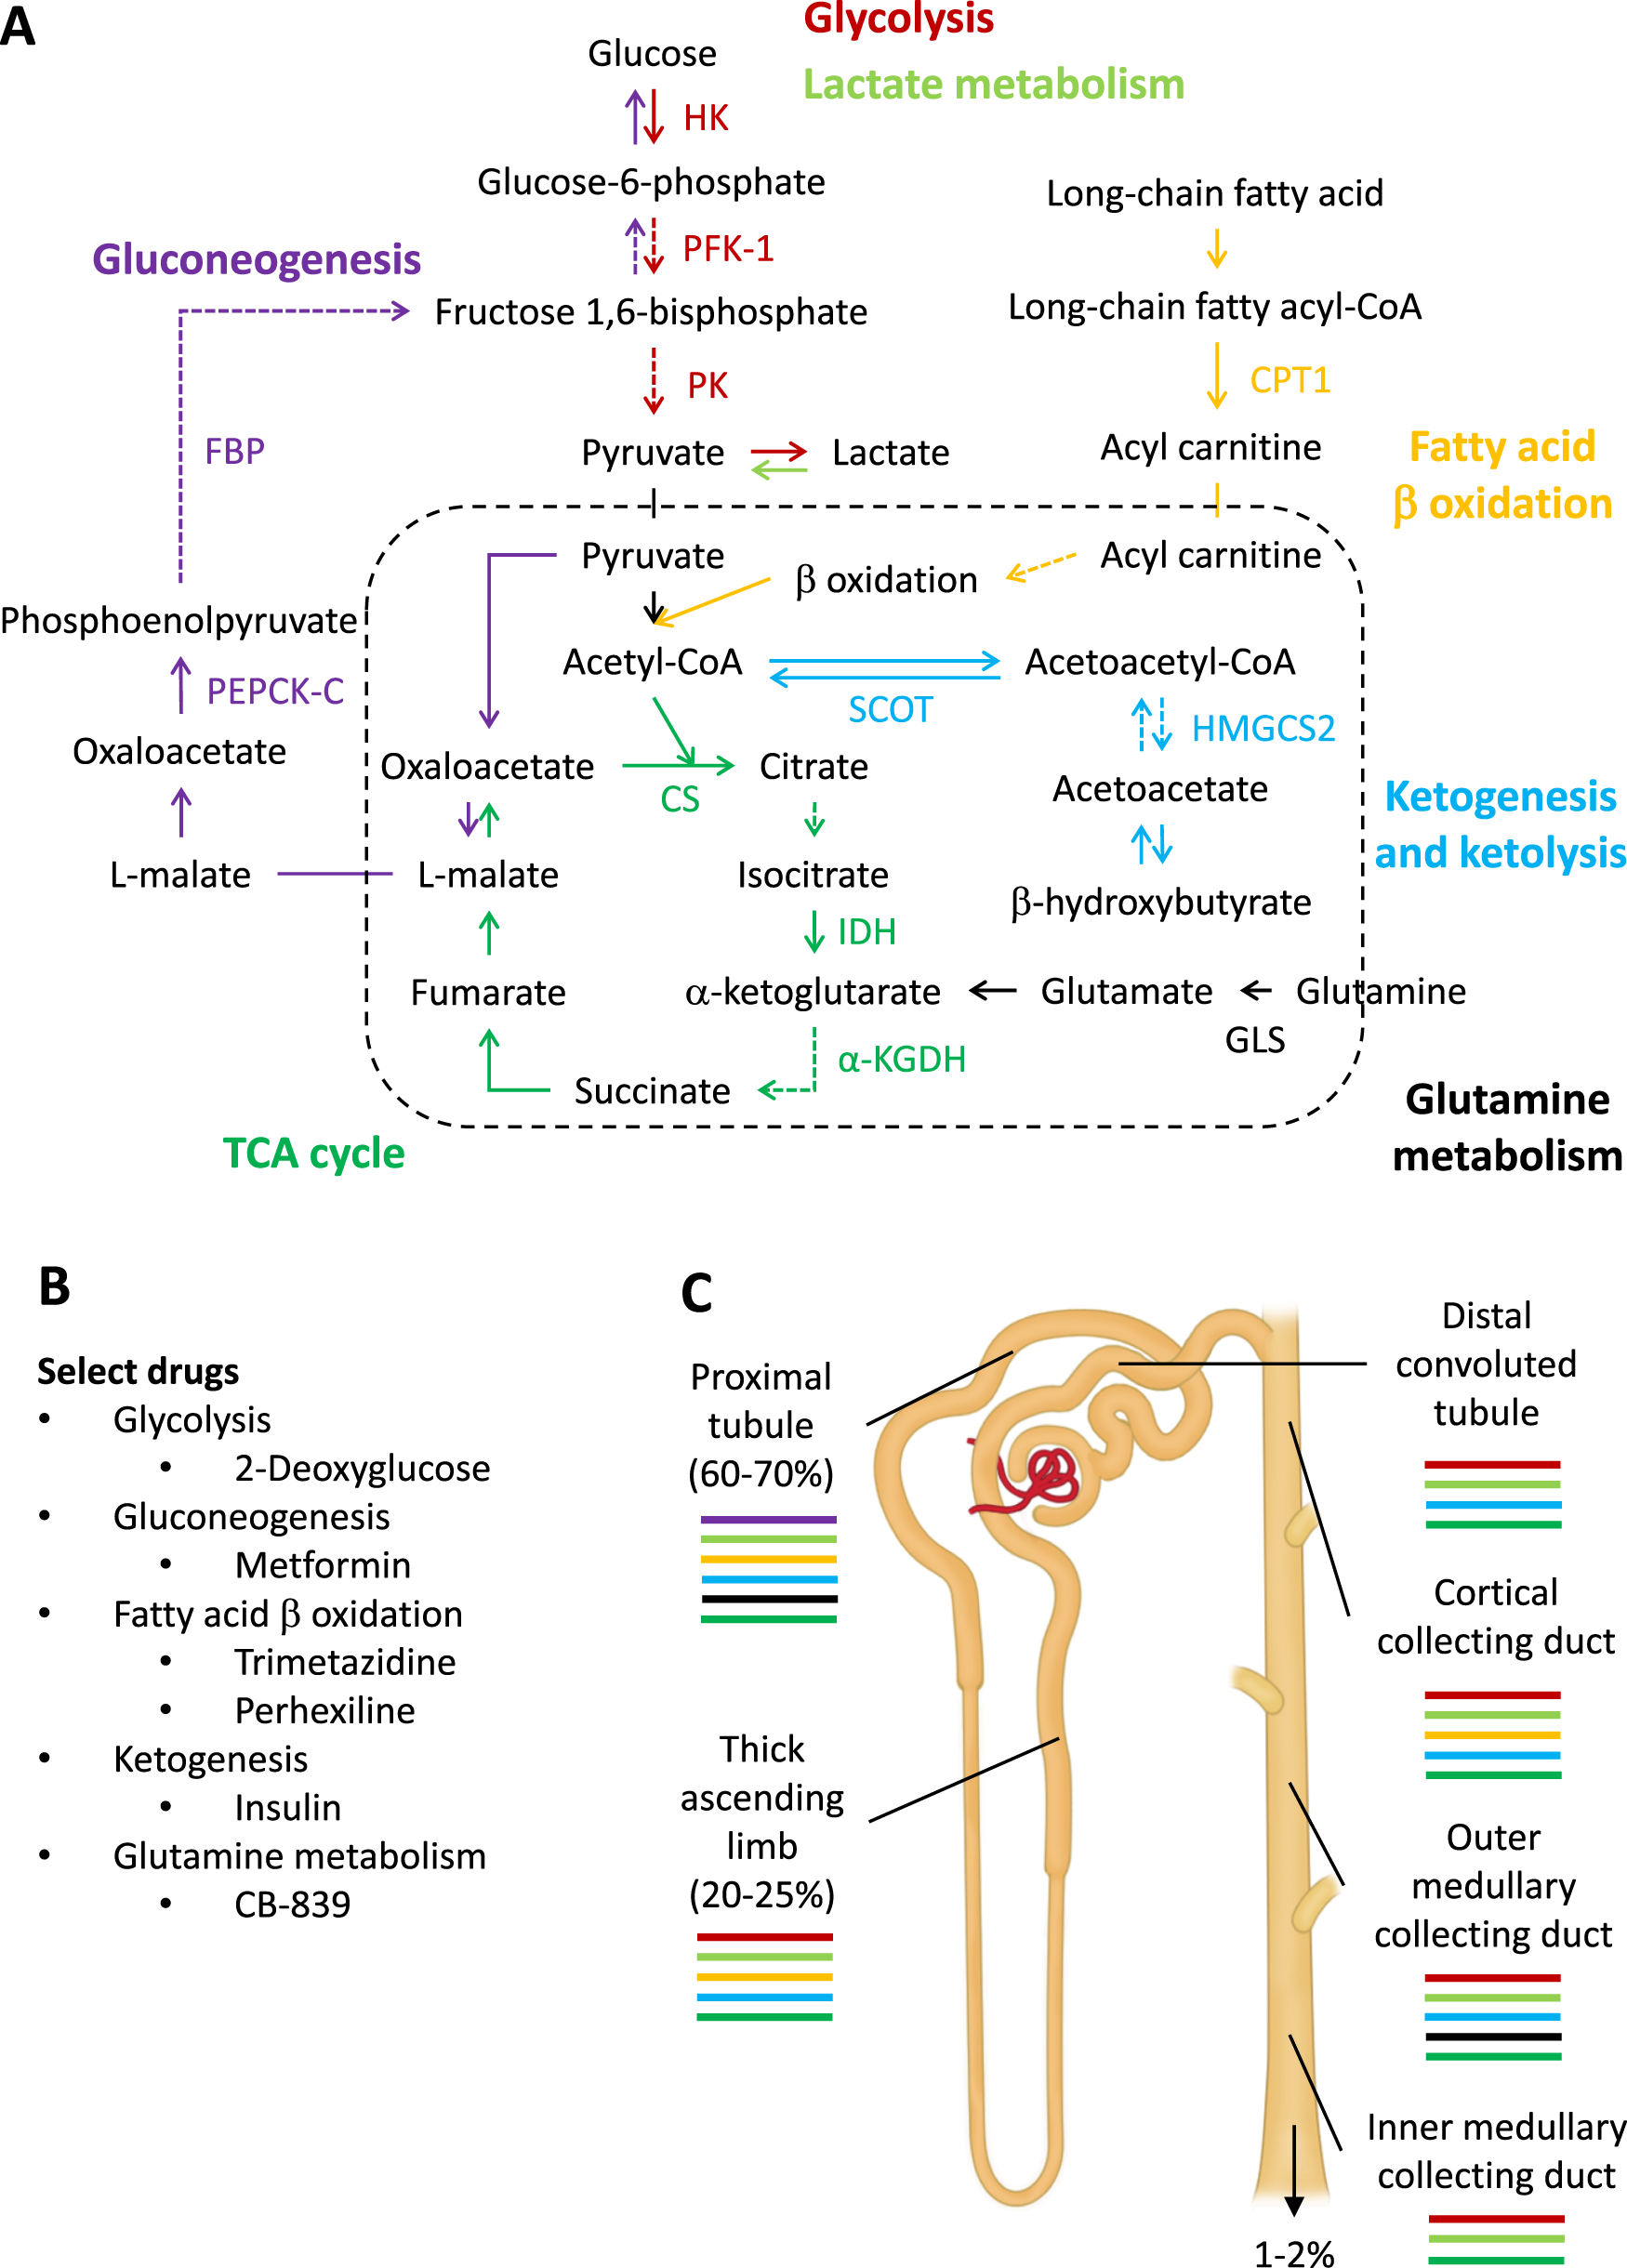 Renal metabolism and hypertension | Nature Communications